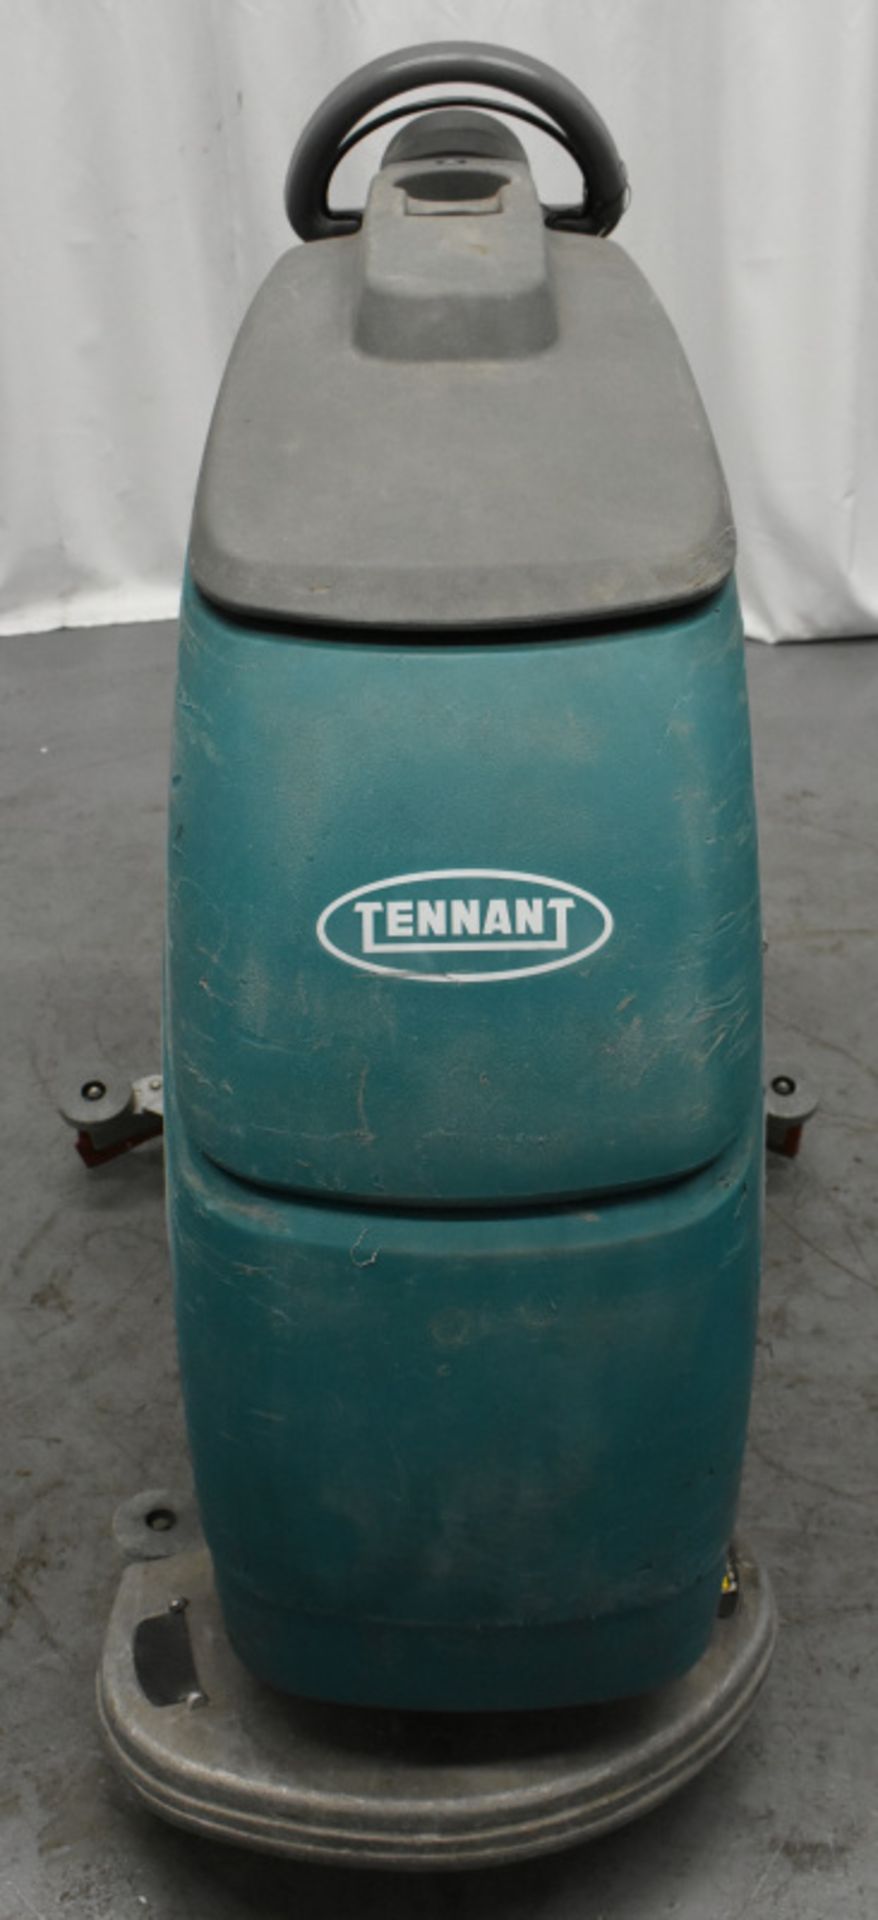 Tennant T3 Fast, comes with key and working charger, starts and runs,1968 hours - Image 8 of 9